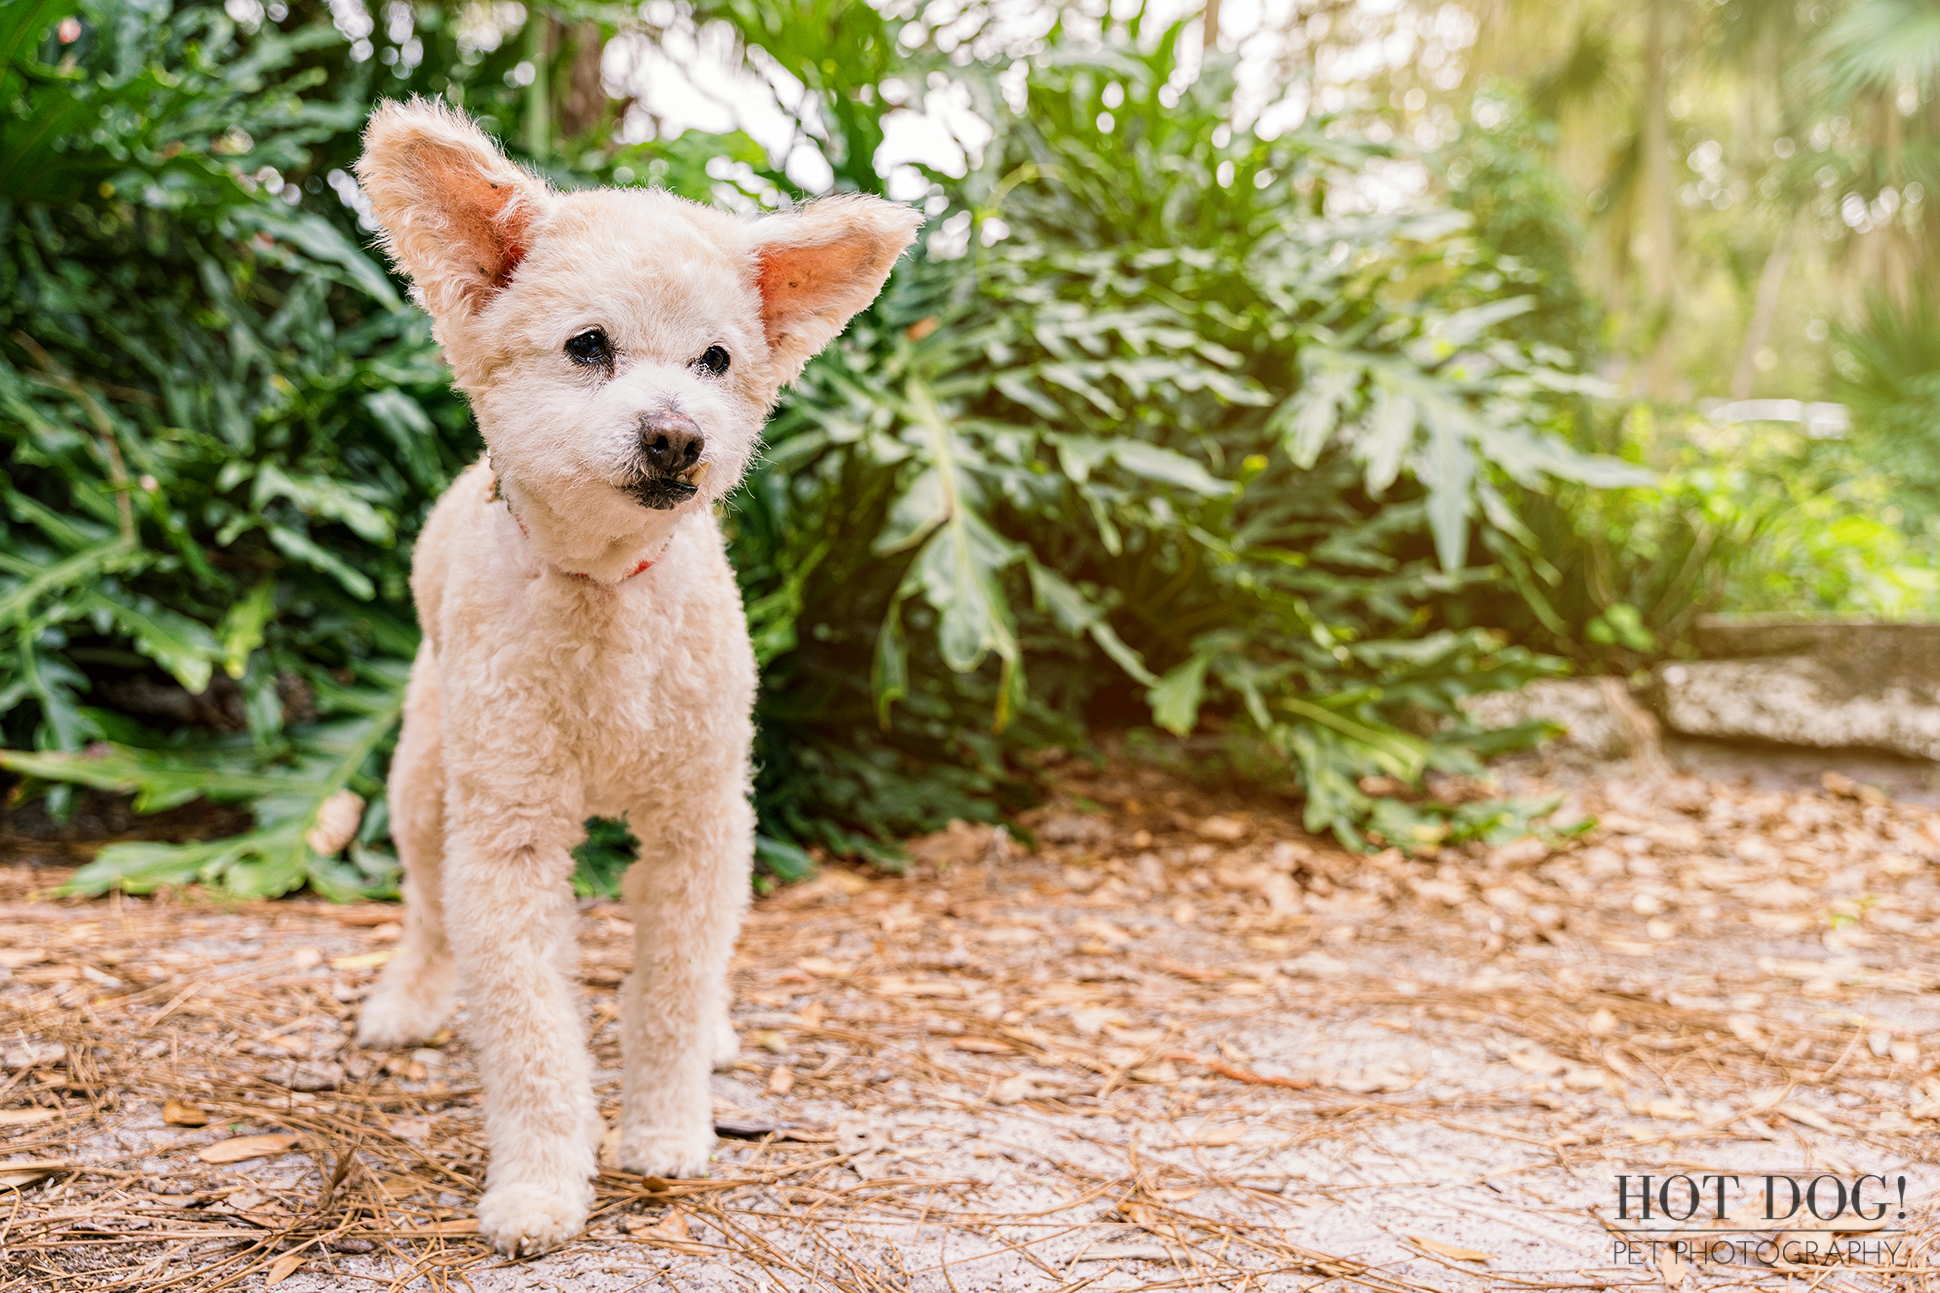 Pet photography session captures the adorable personality of 18-year-old Miley the Terri-Poo mix at Dickson Azalea Park.